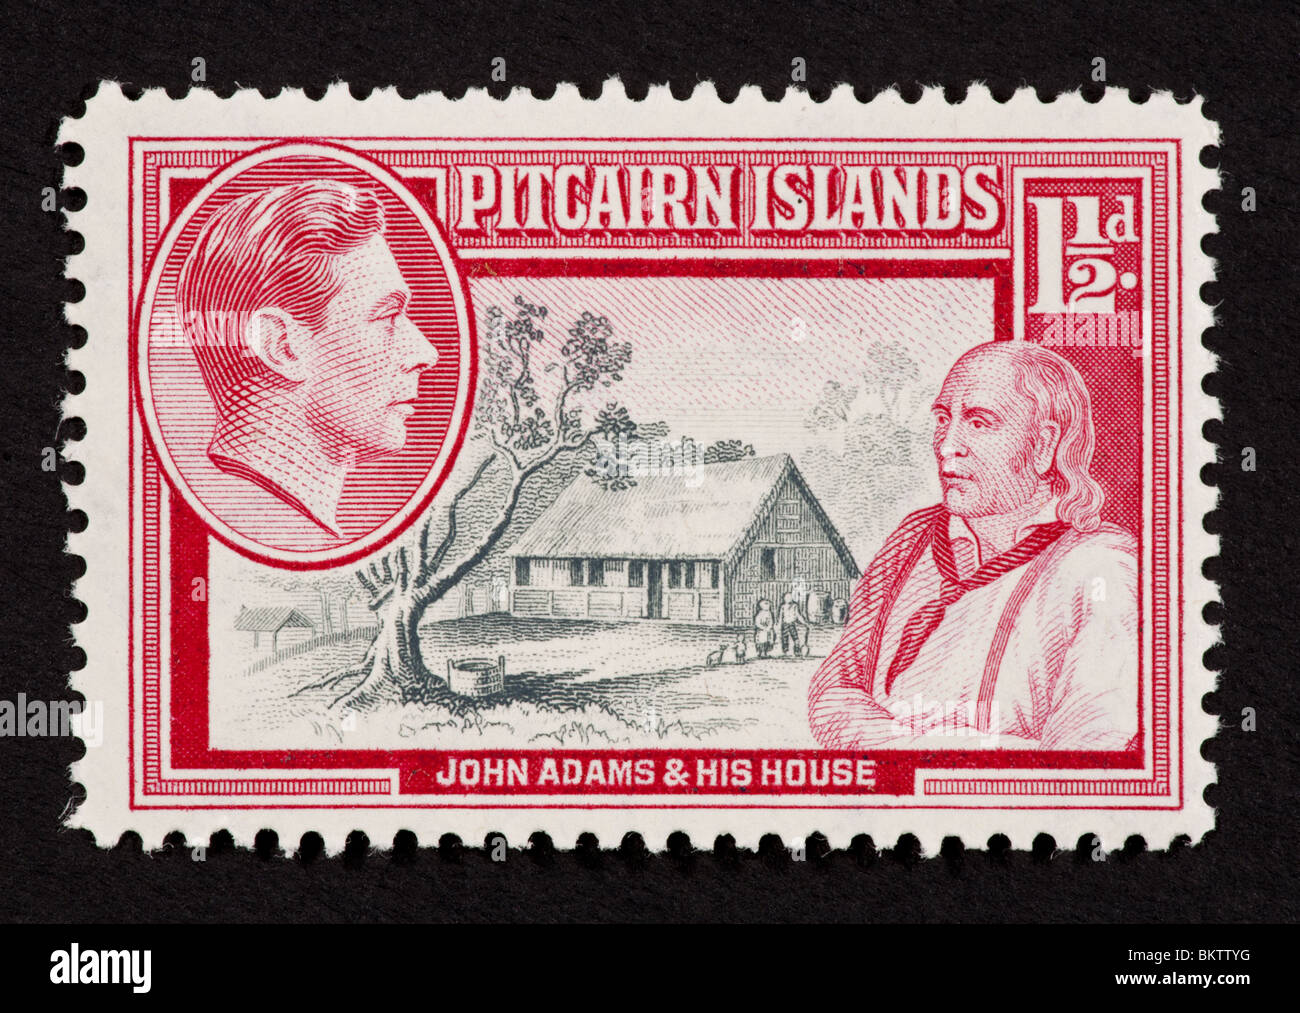 Postage stamp from Pitcairn Islands depicting John Adams, his house and George VI. Stock Photo